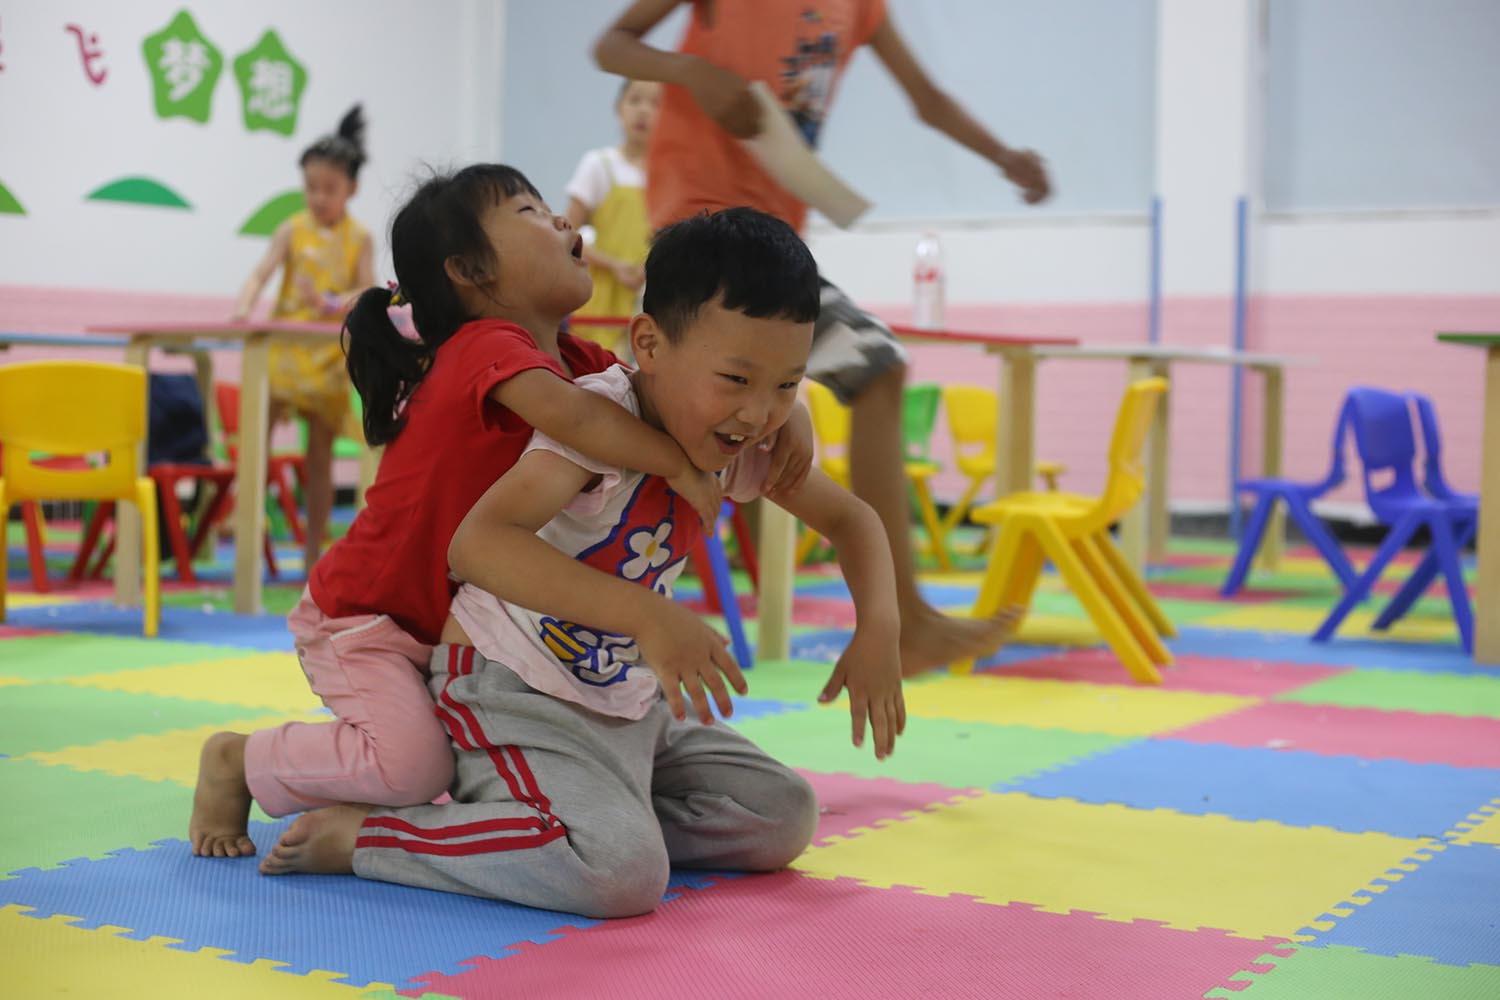 Overview and Impact of the 2019 Child Friendly Spaces Programme in China